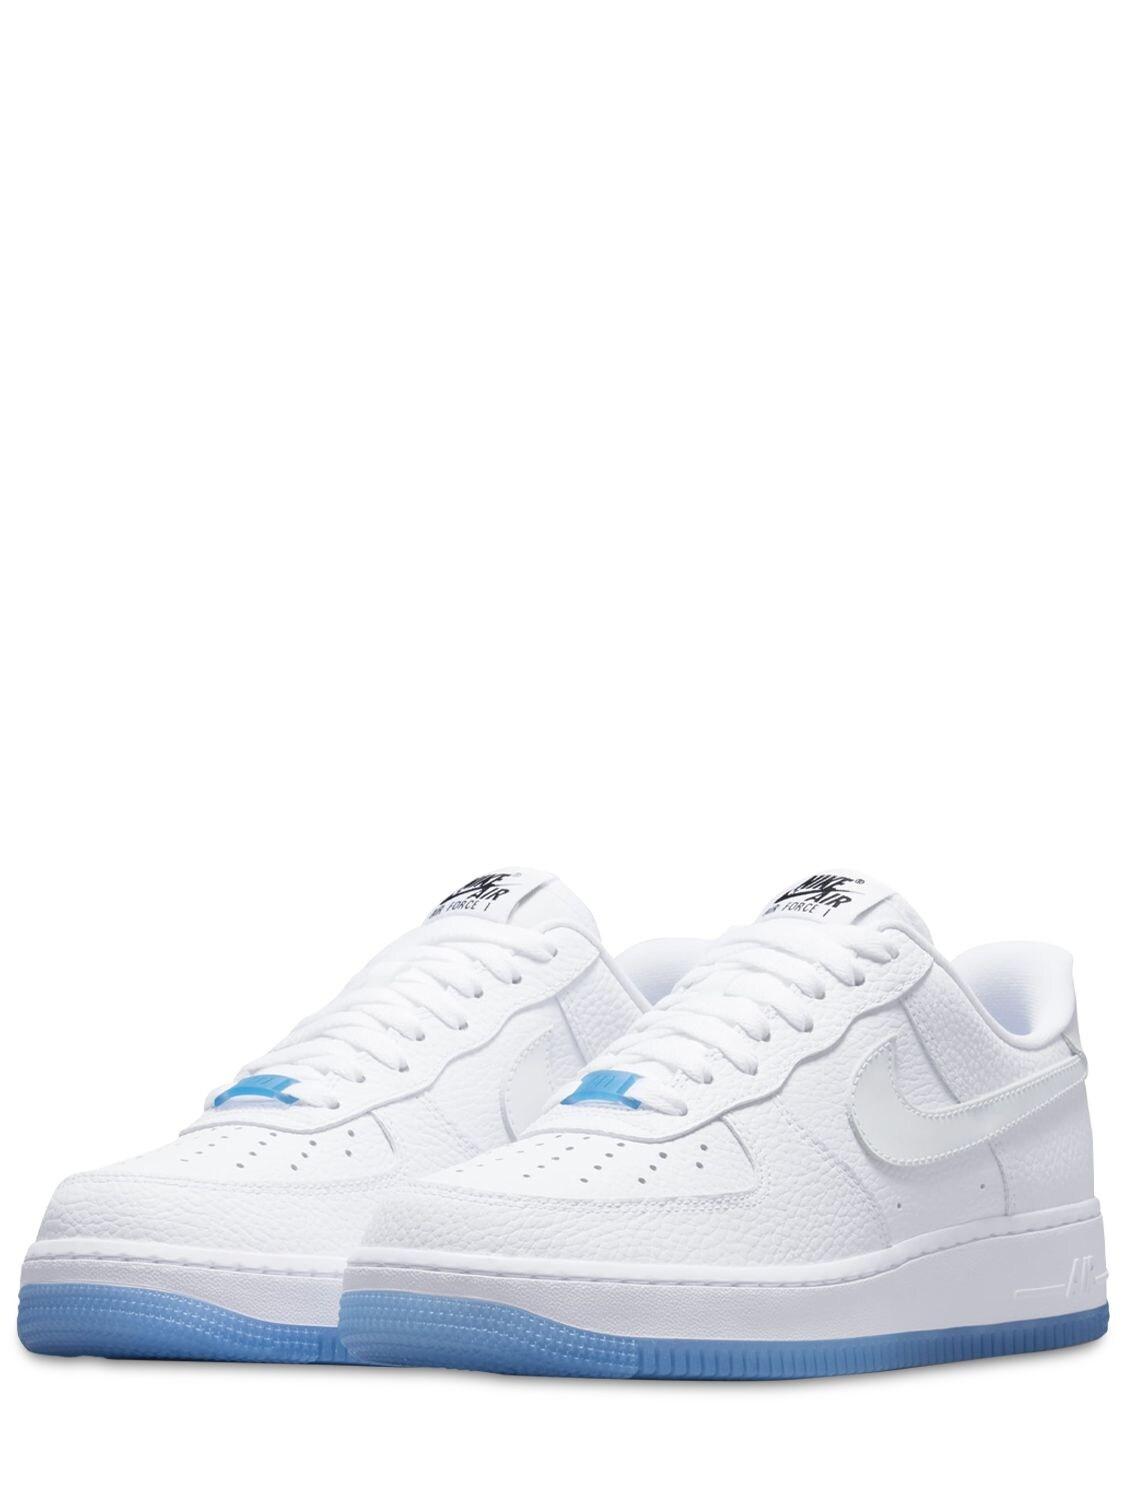 Nike Air Force 1 '07 Lx Sneakers in White - Lyst